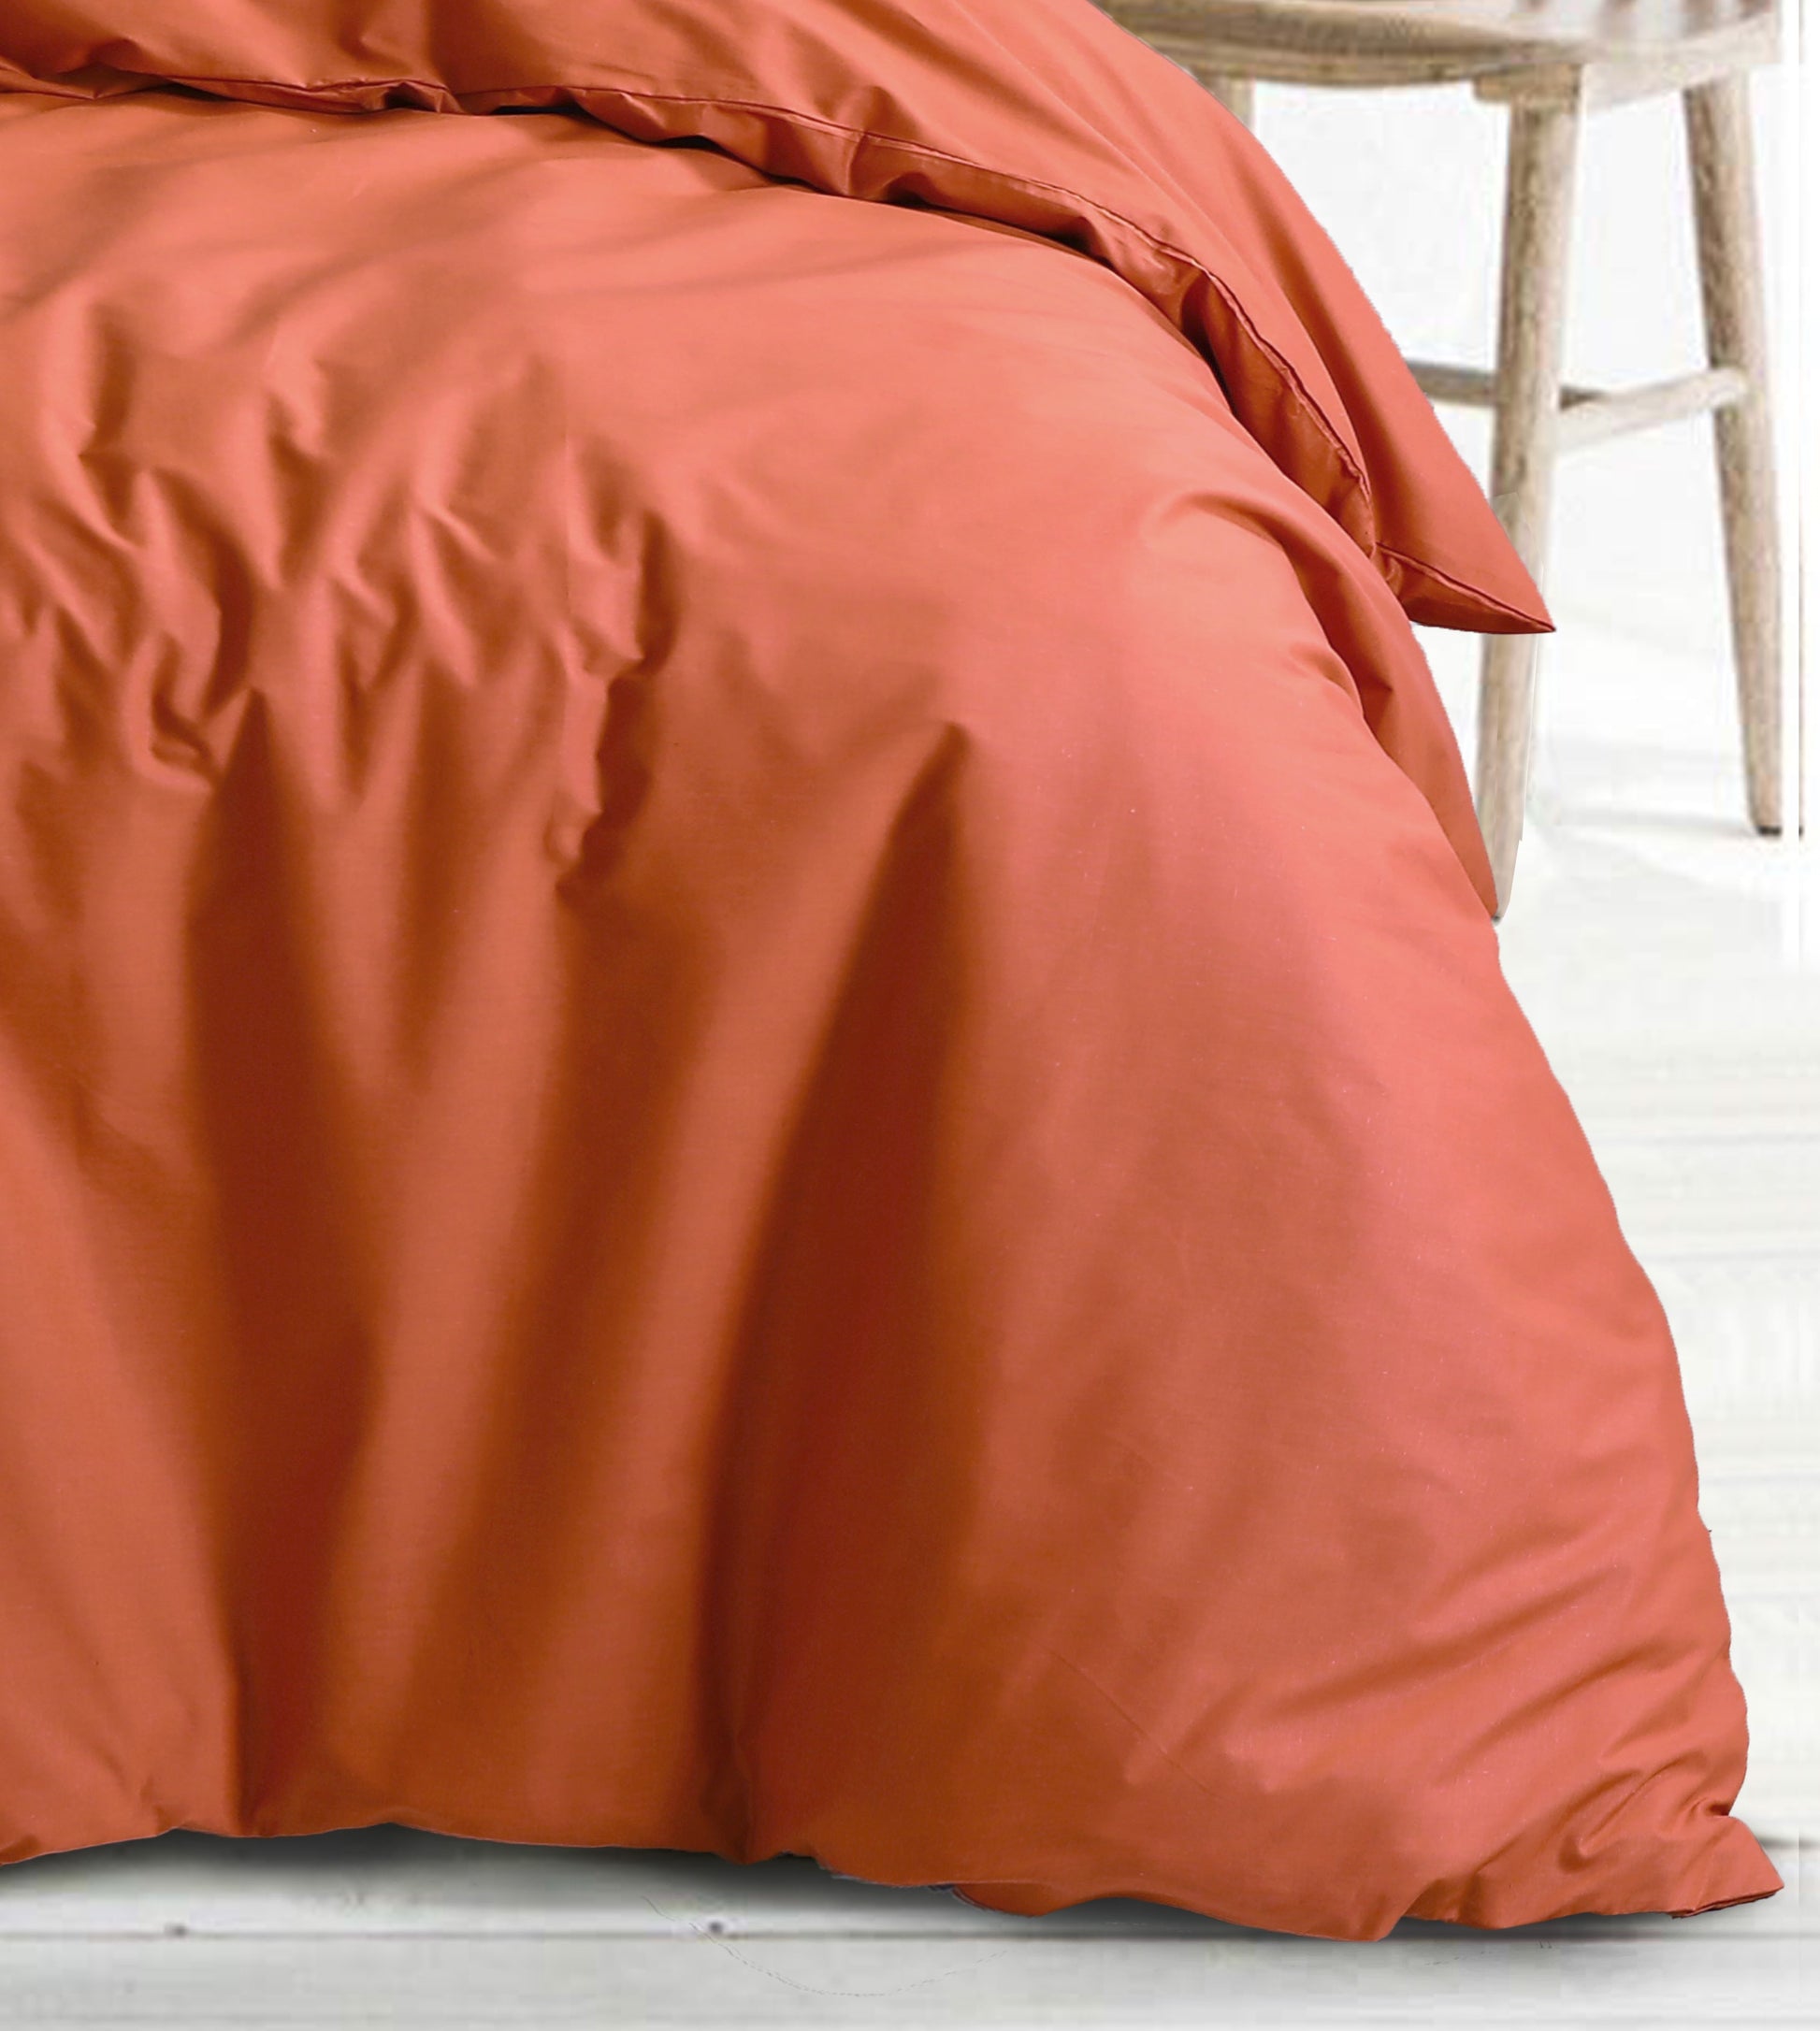 Doona Cover with Extra Standard Pillow Covers | Royale Cotton Rust